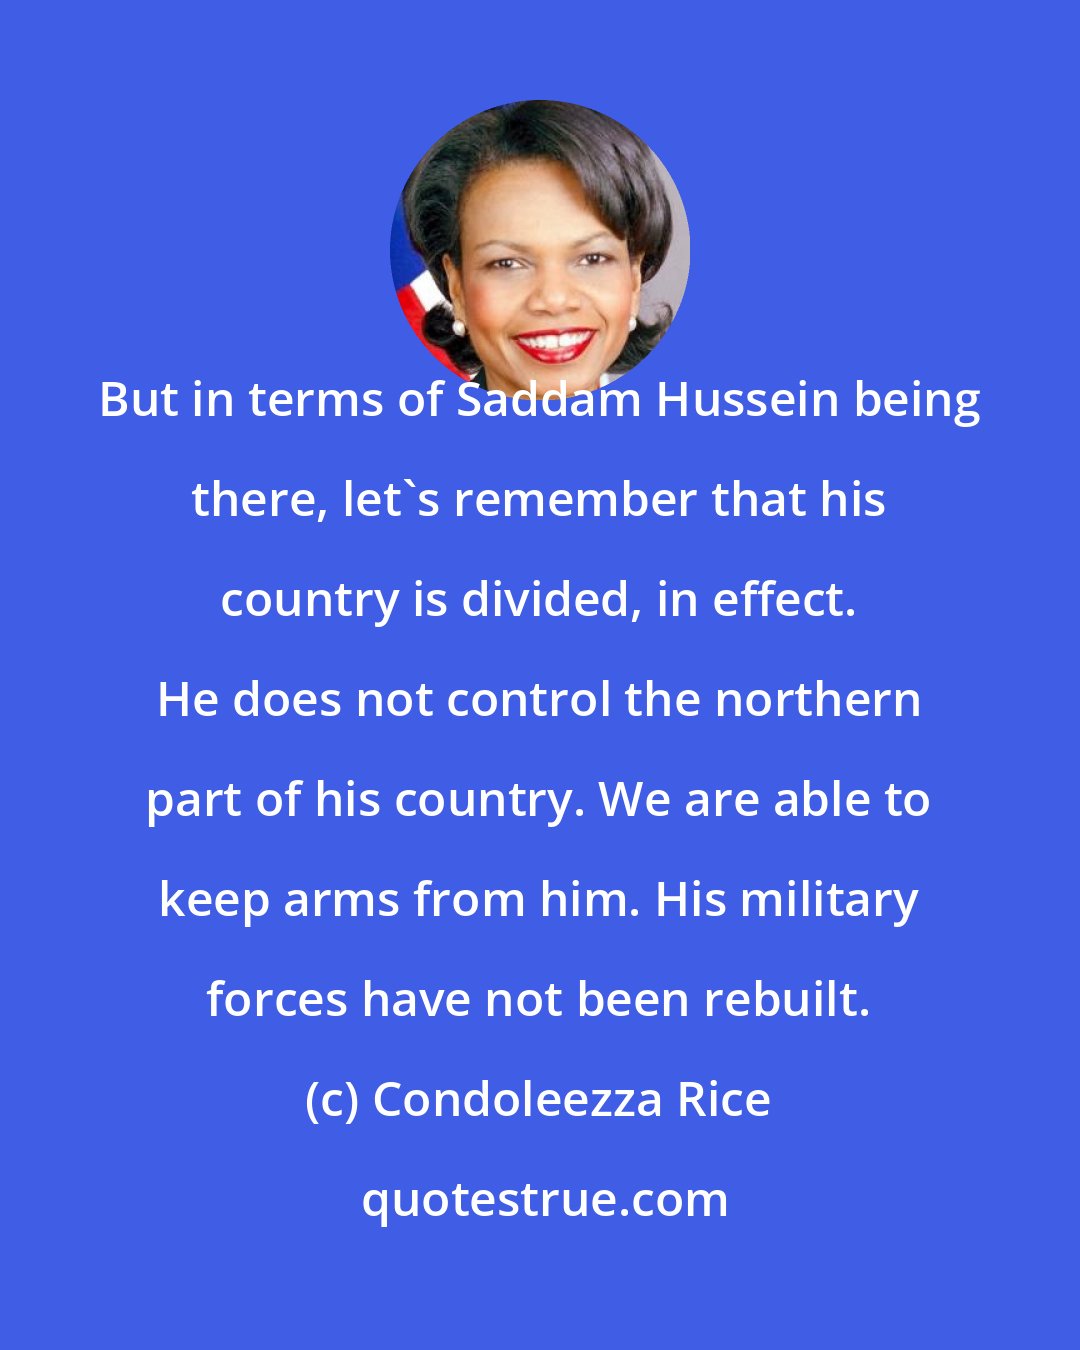 Condoleezza Rice: But in terms of Saddam Hussein being there, let's remember that his country is divided, in effect. He does not control the northern part of his country. We are able to keep arms from him. His military forces have not been rebuilt.